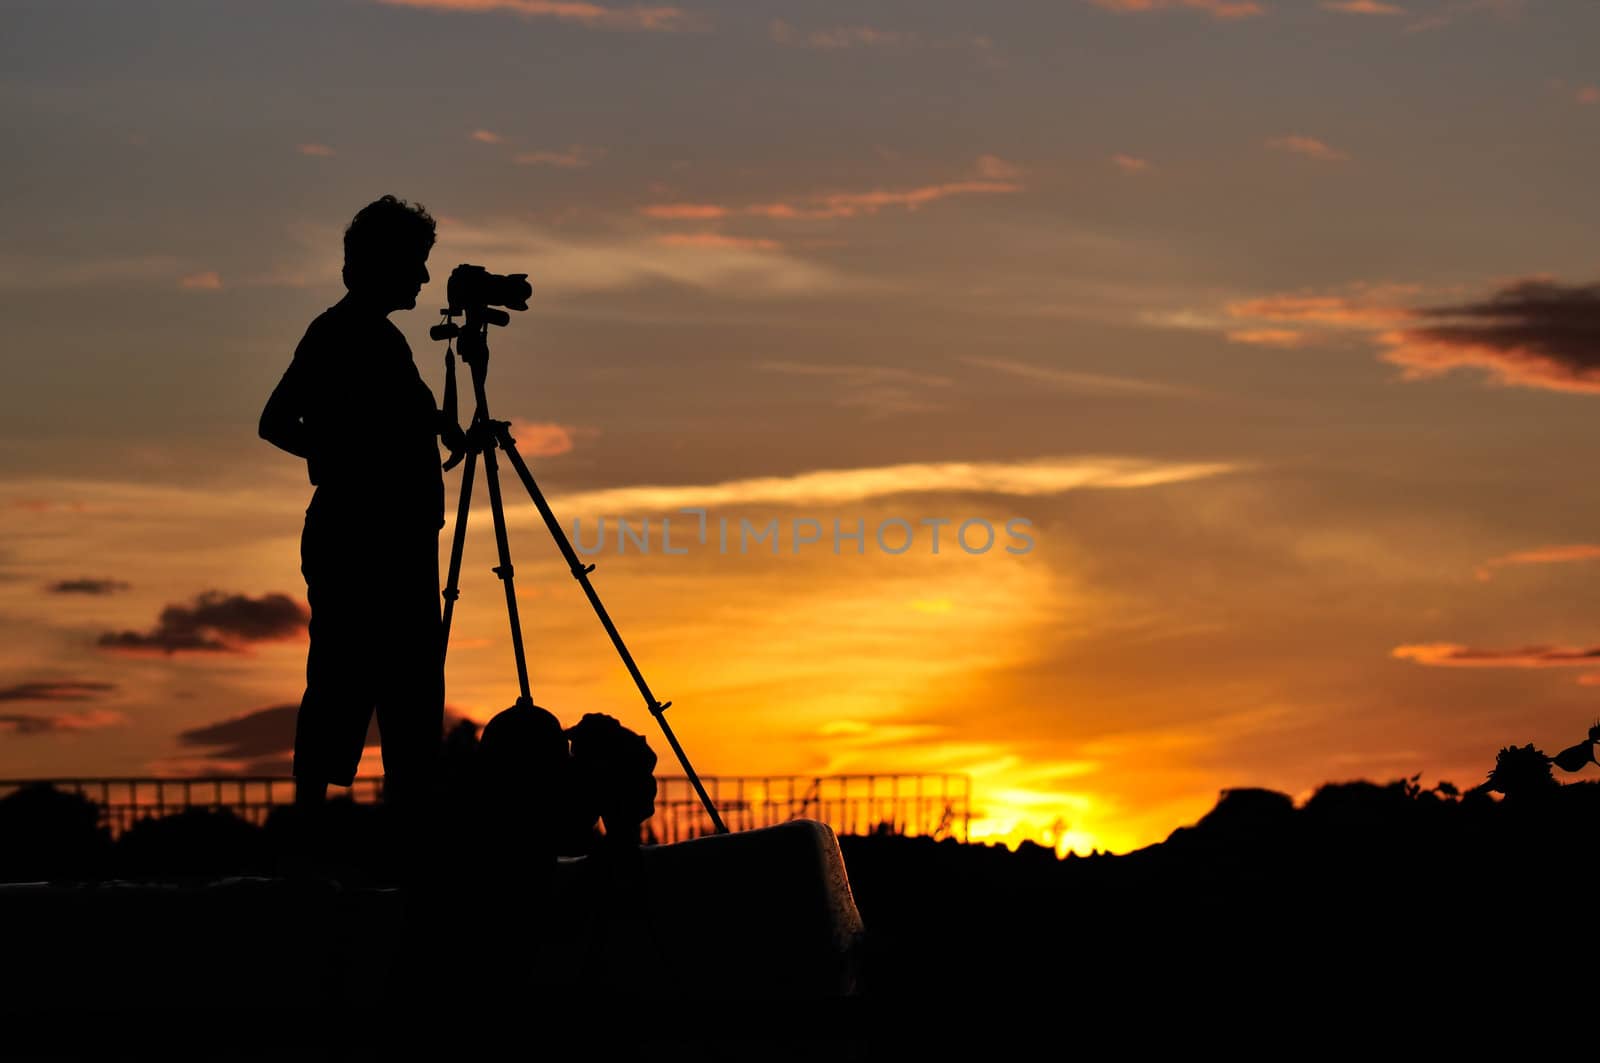 Silhouette of a photographer shooting sunset scene